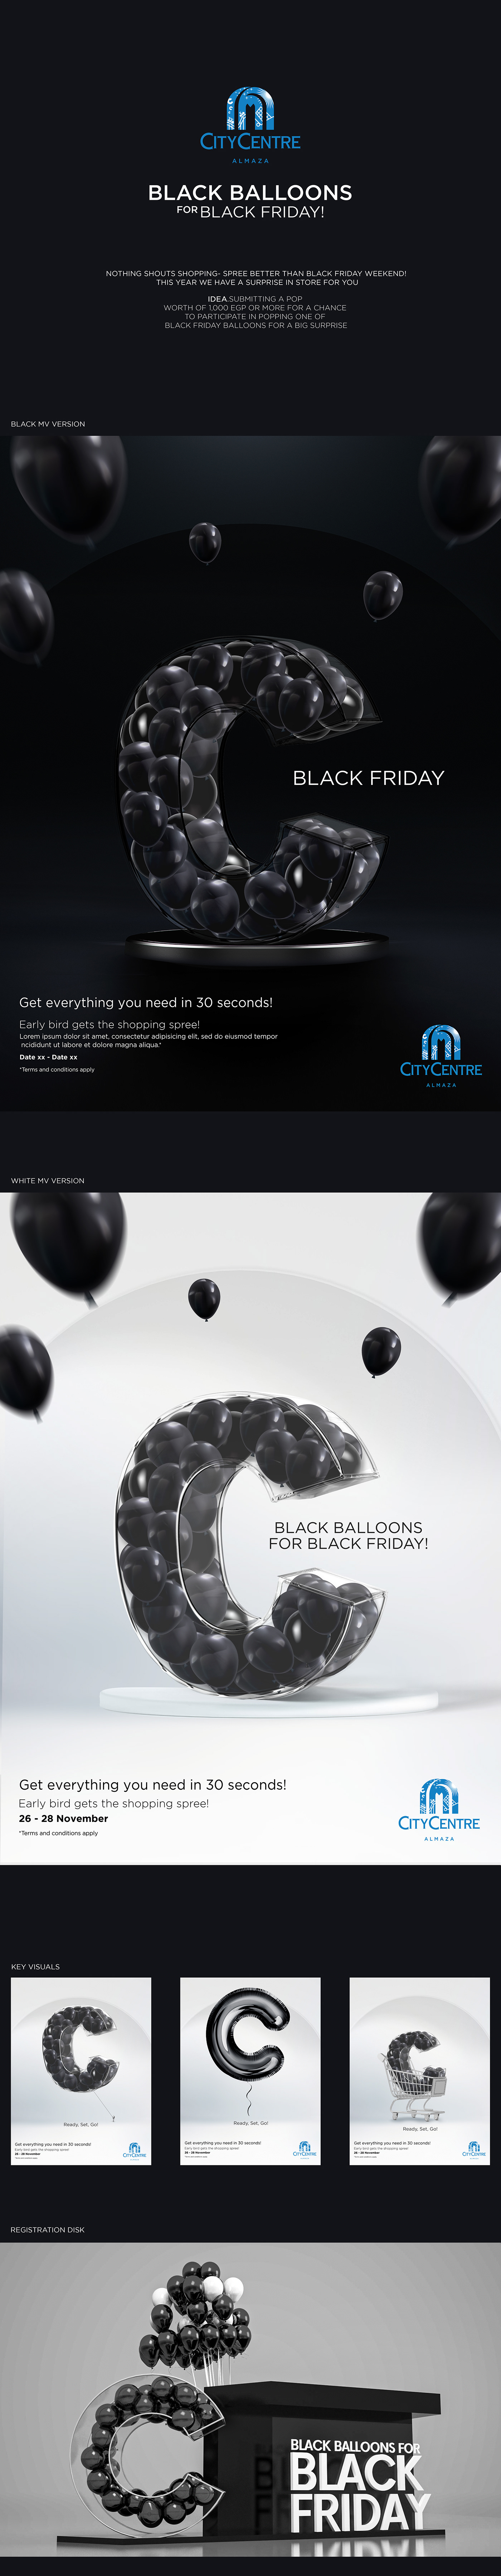 balloon Black Friday citycentre cool Shopping visual White Friday mall concept city centre